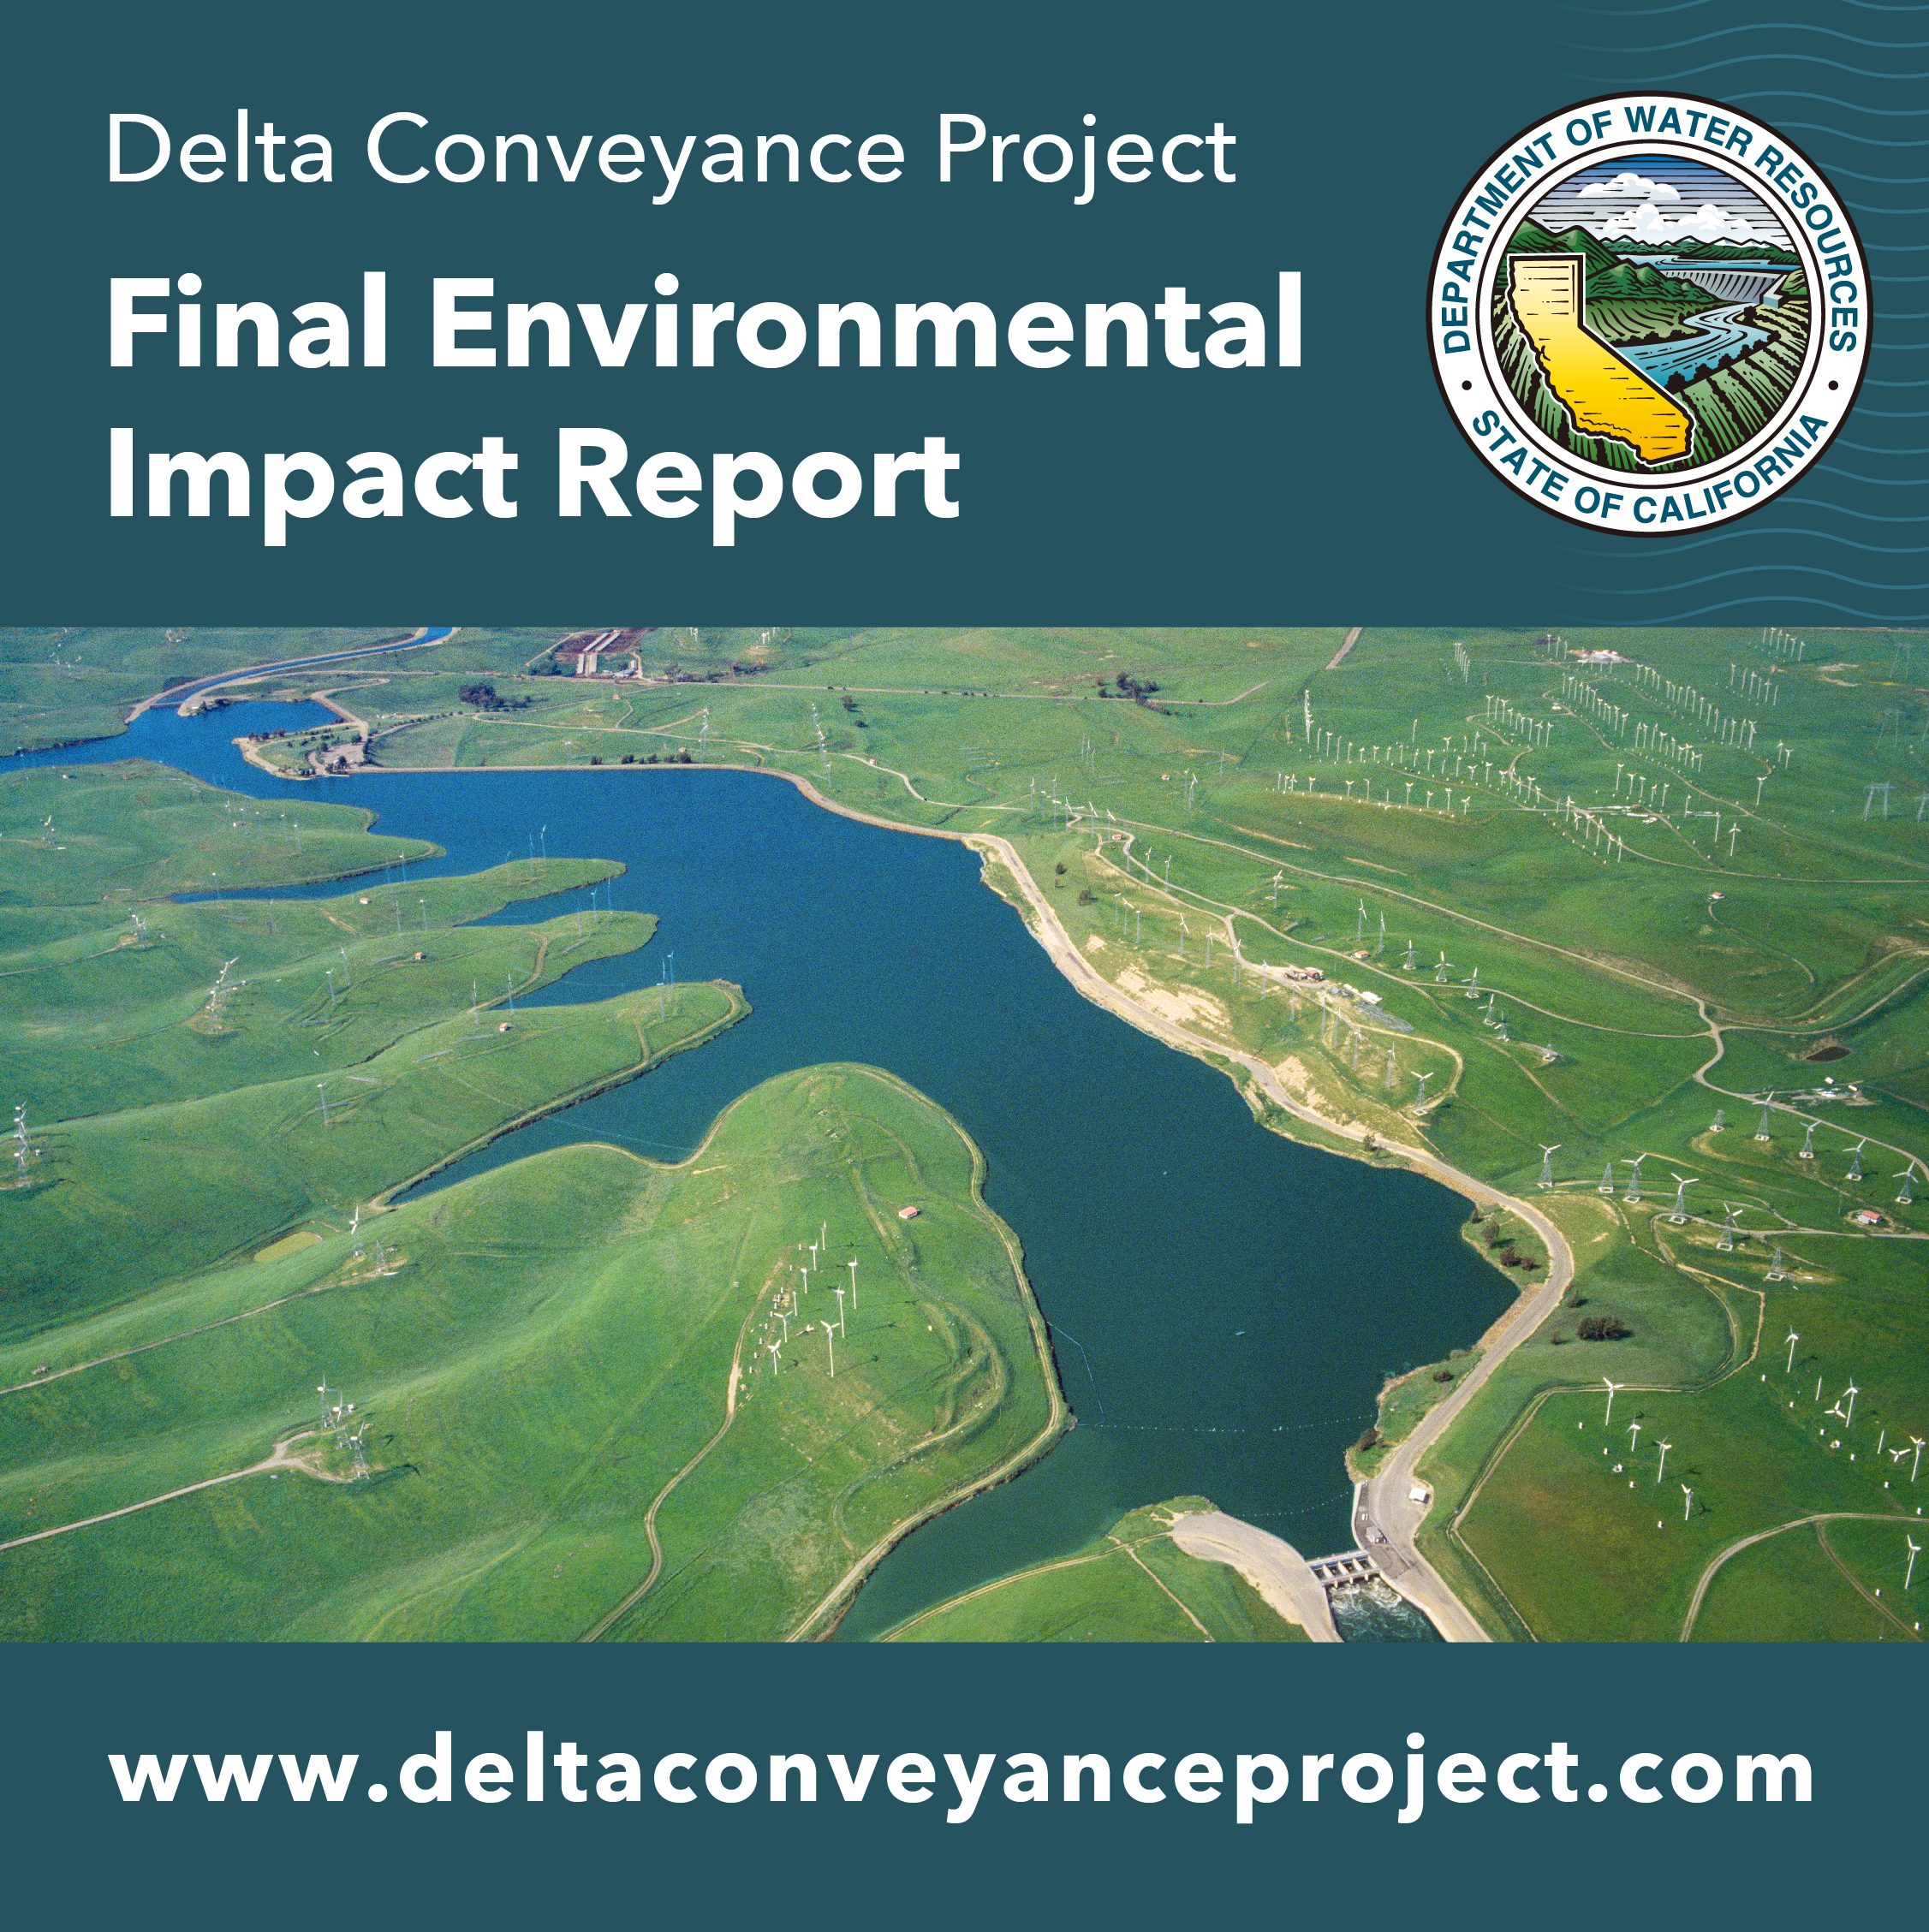 Delta Conveyance Project final Environmental Impact Report